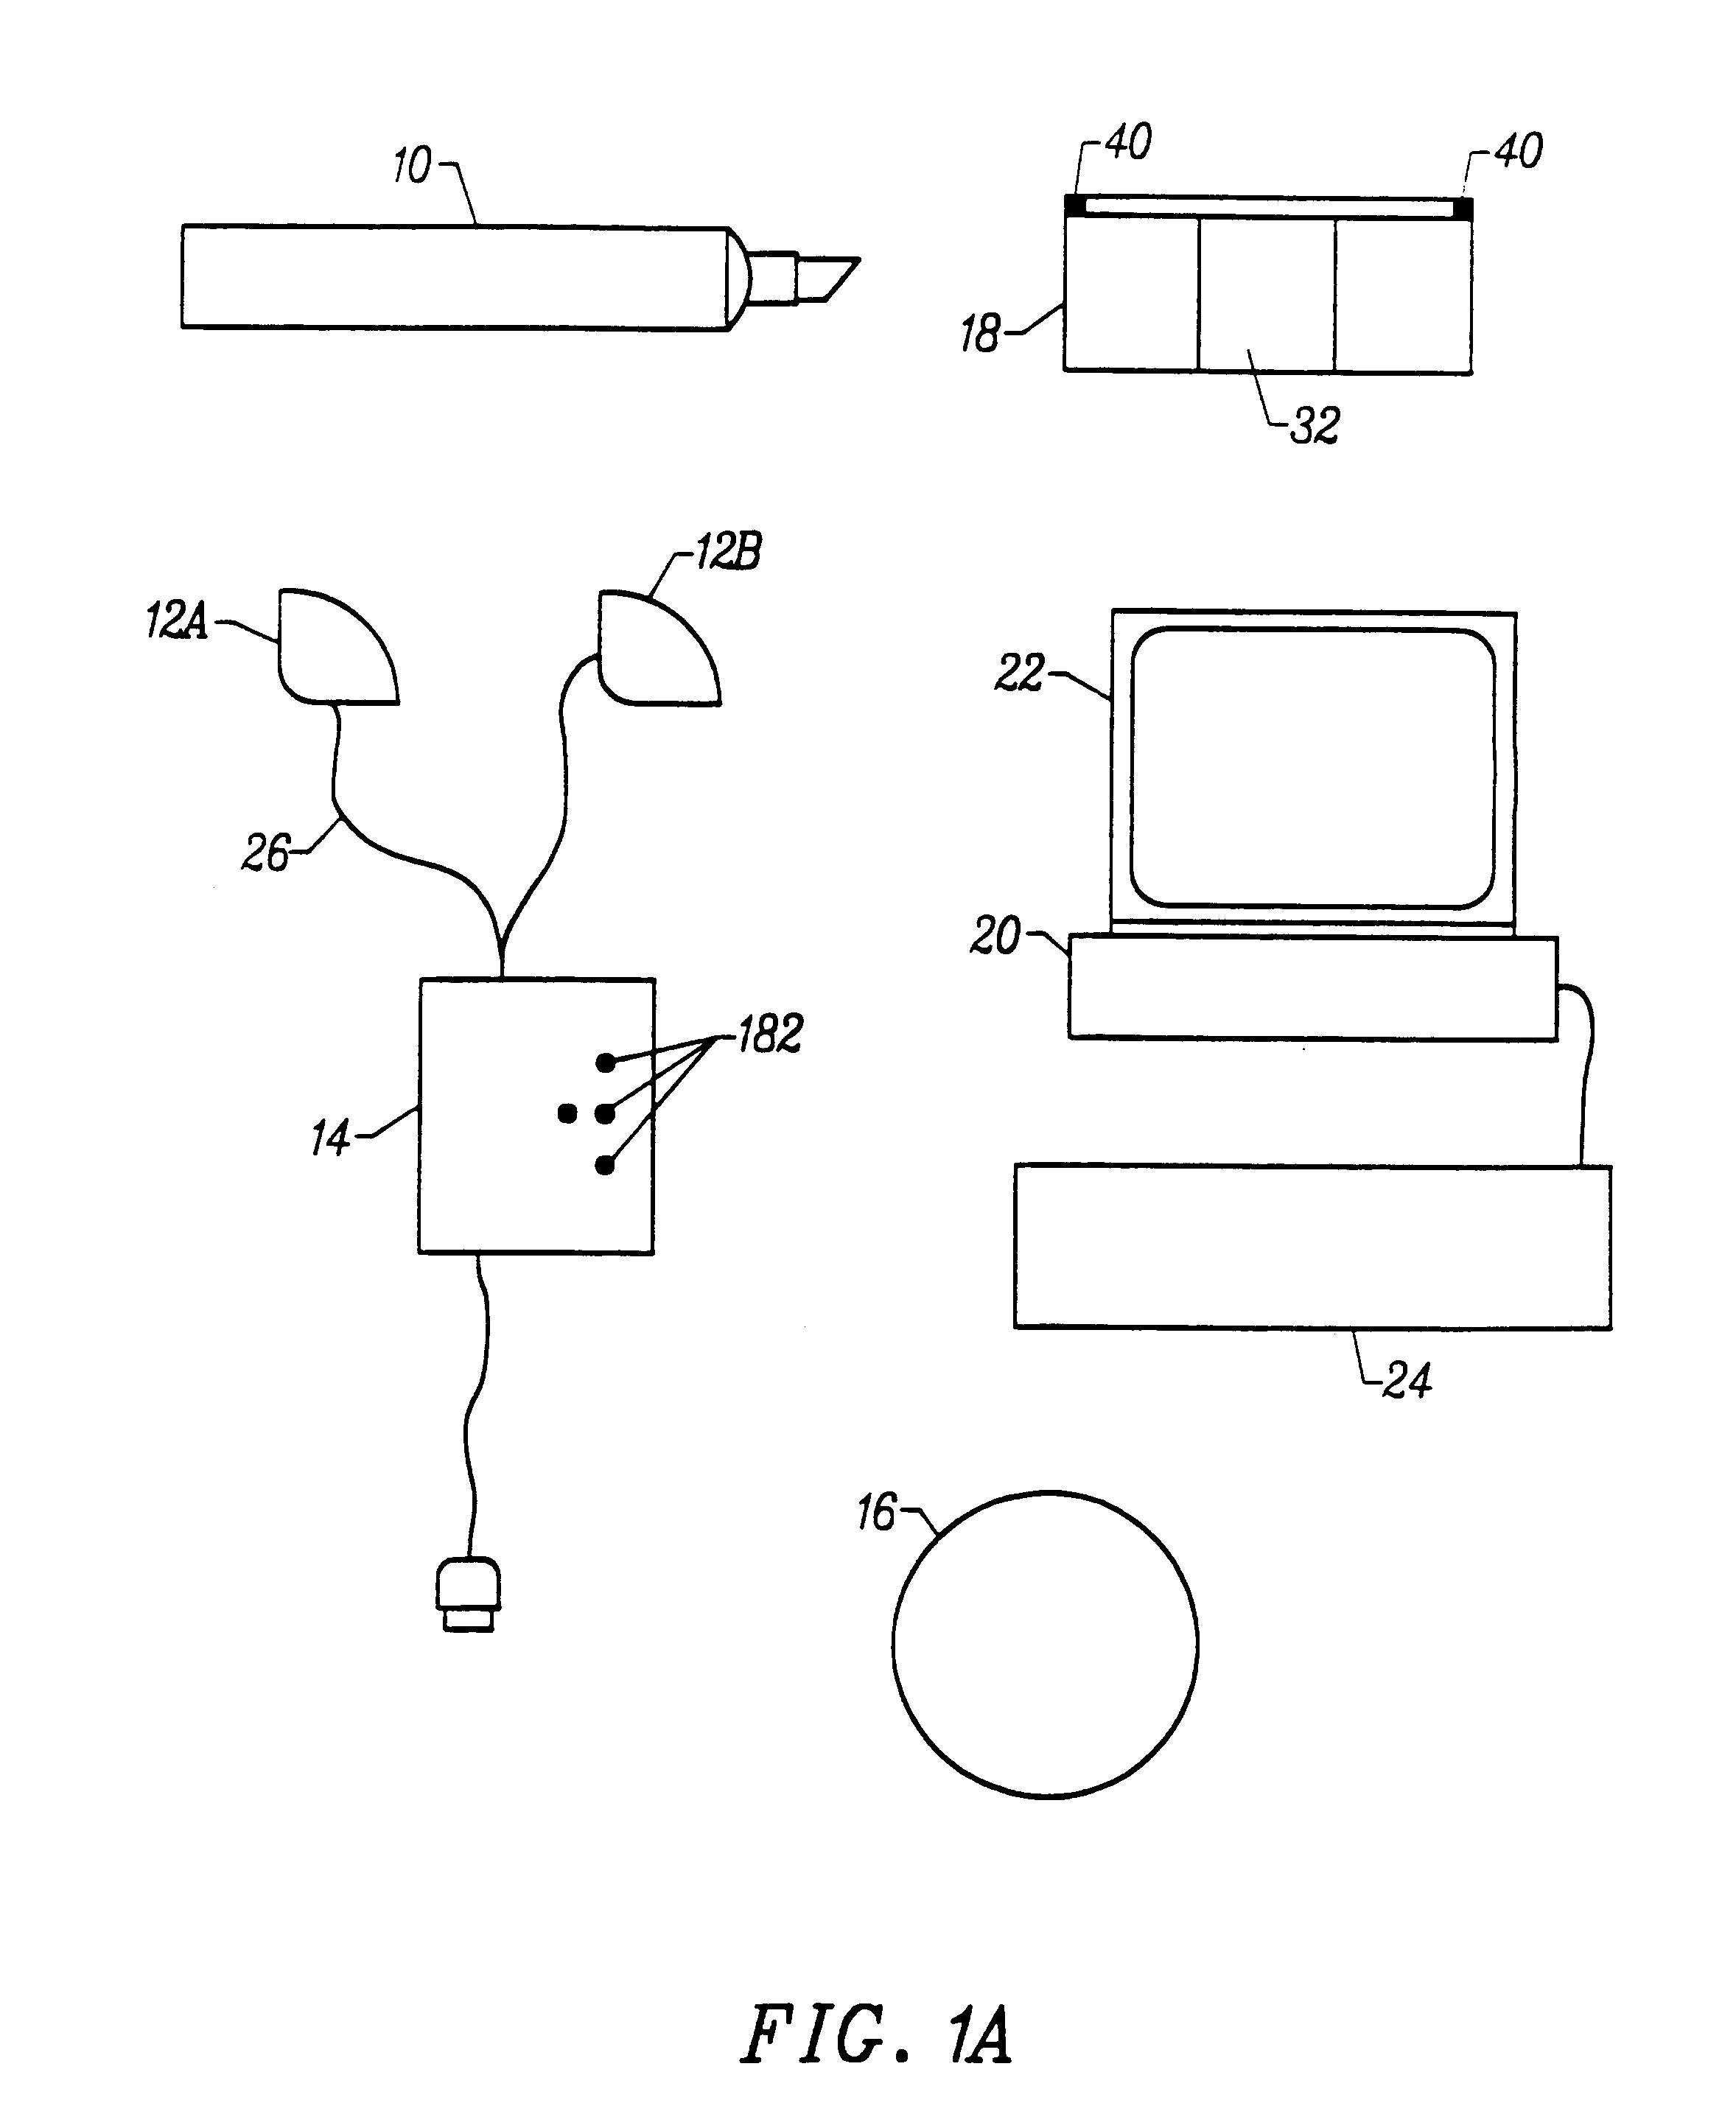 Method and software for enabling use of transcription system as a mouse